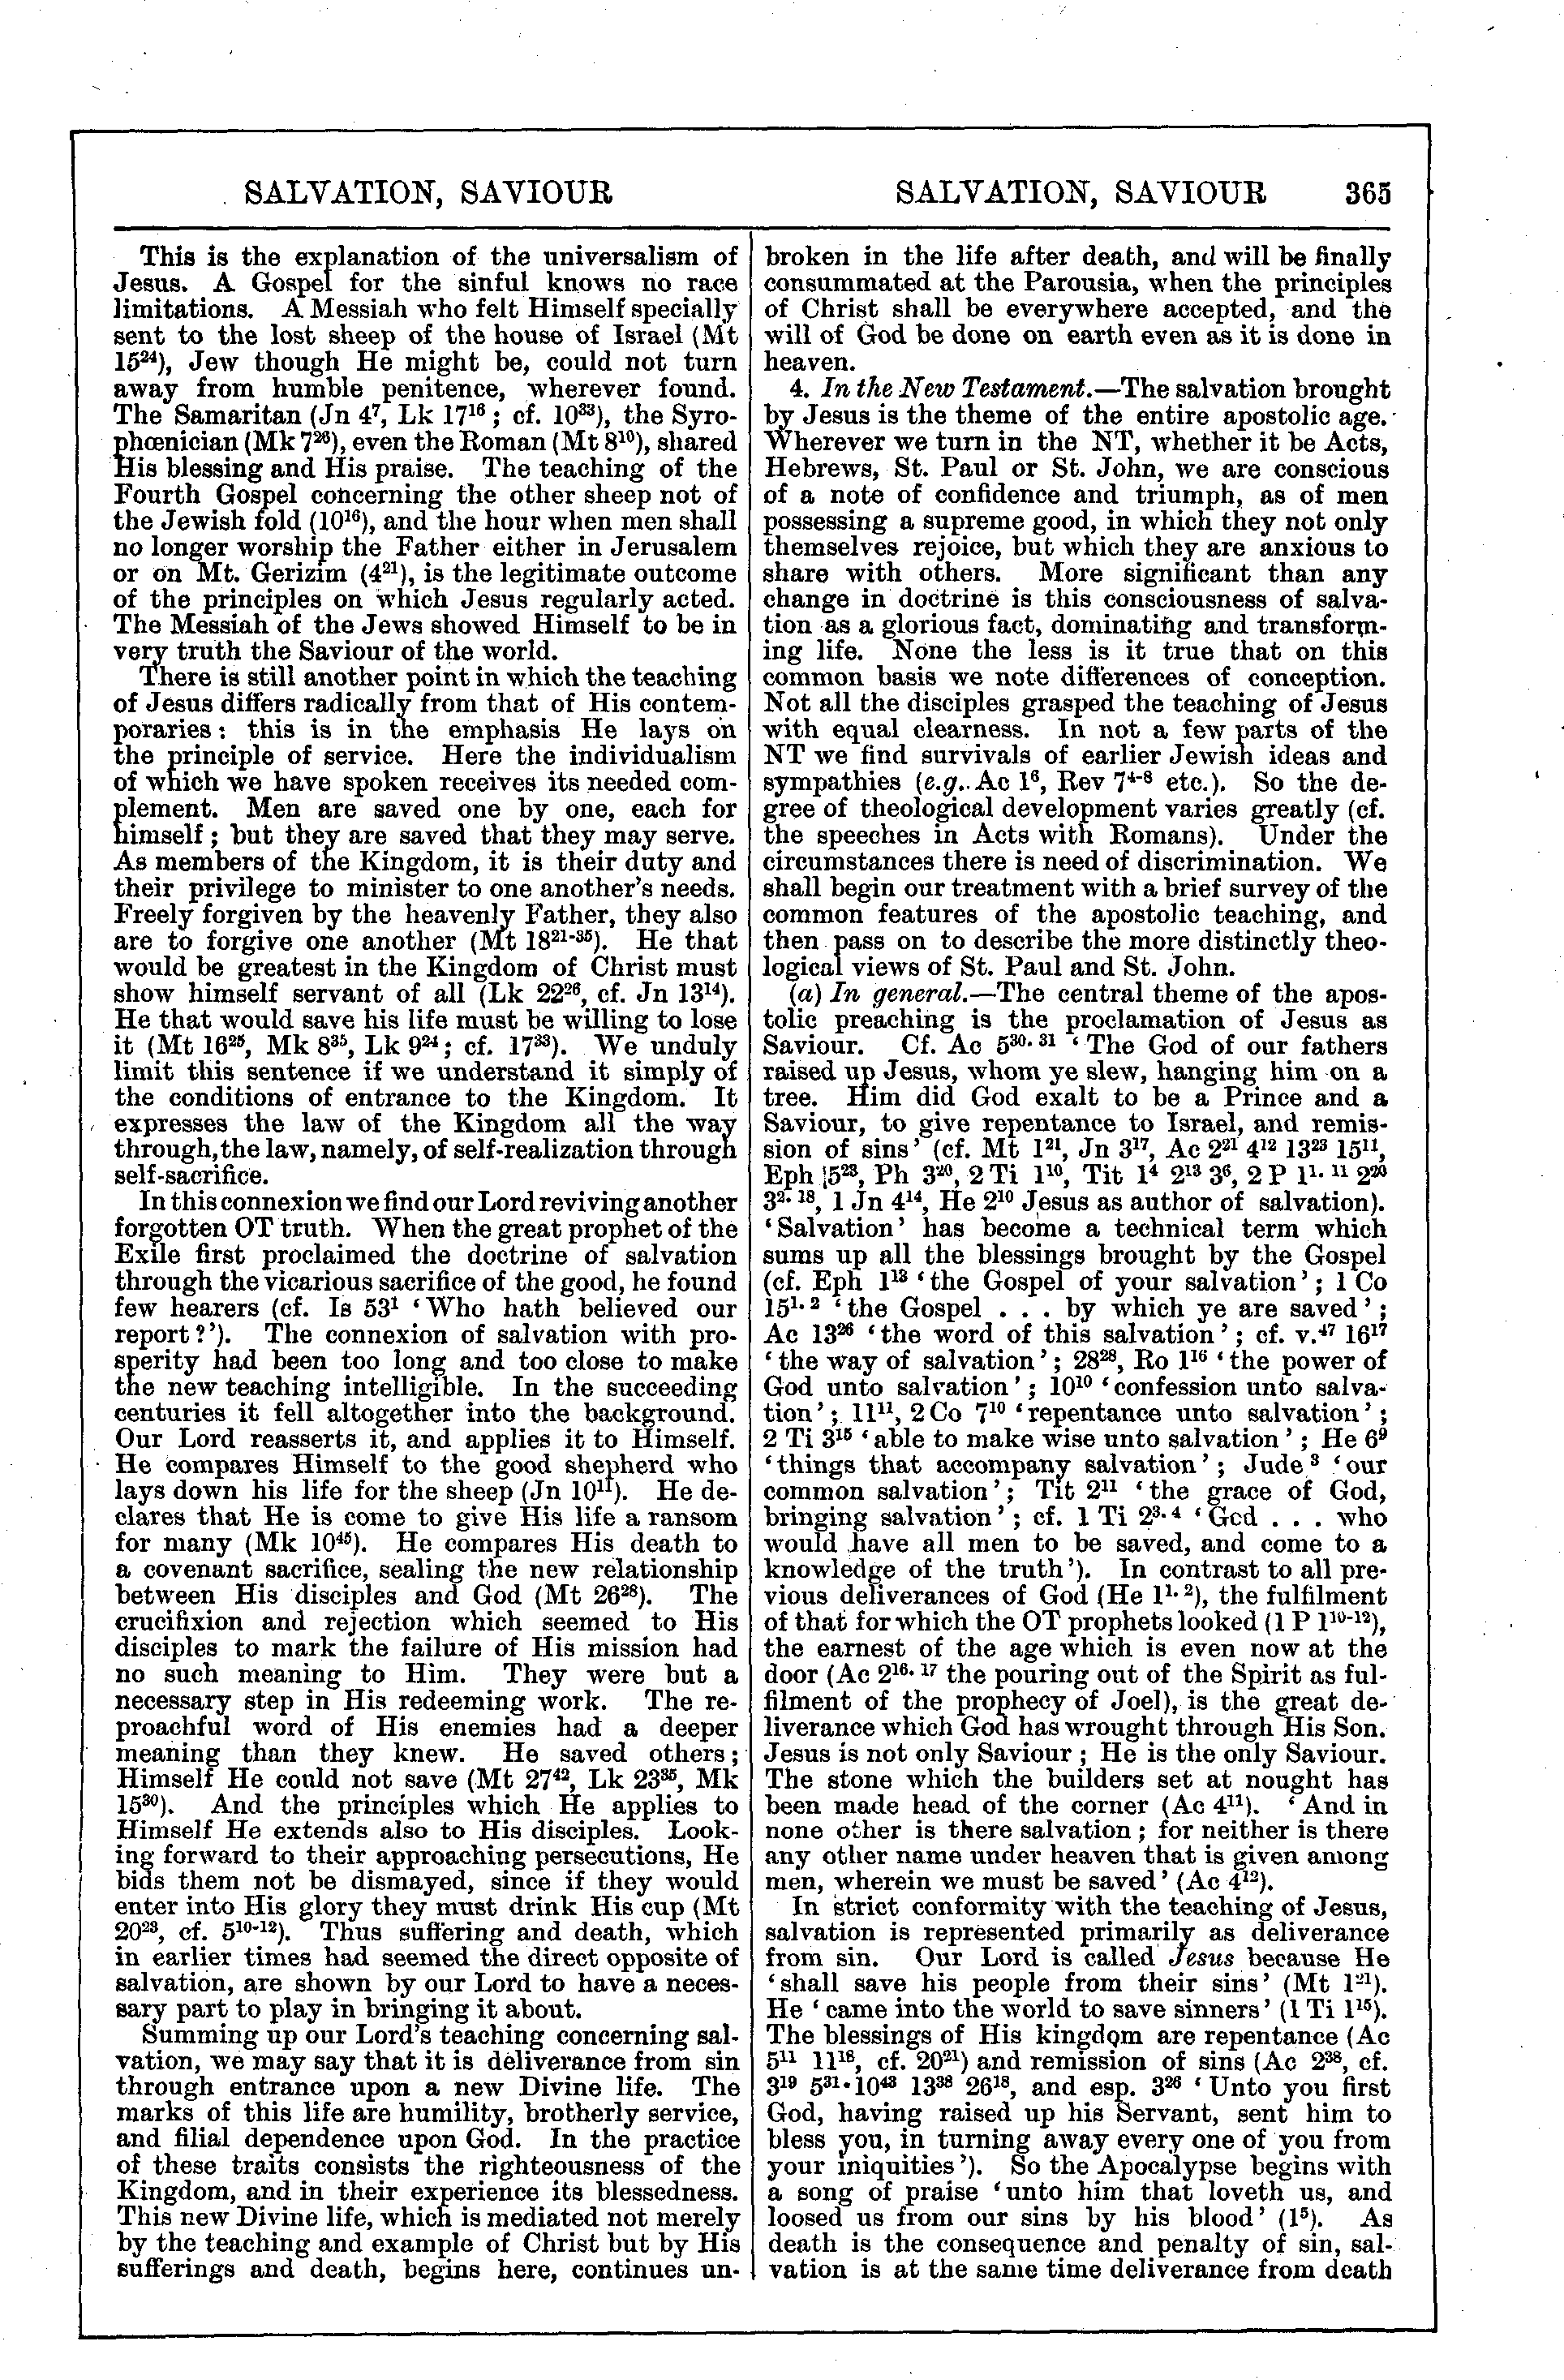 Image of page 365